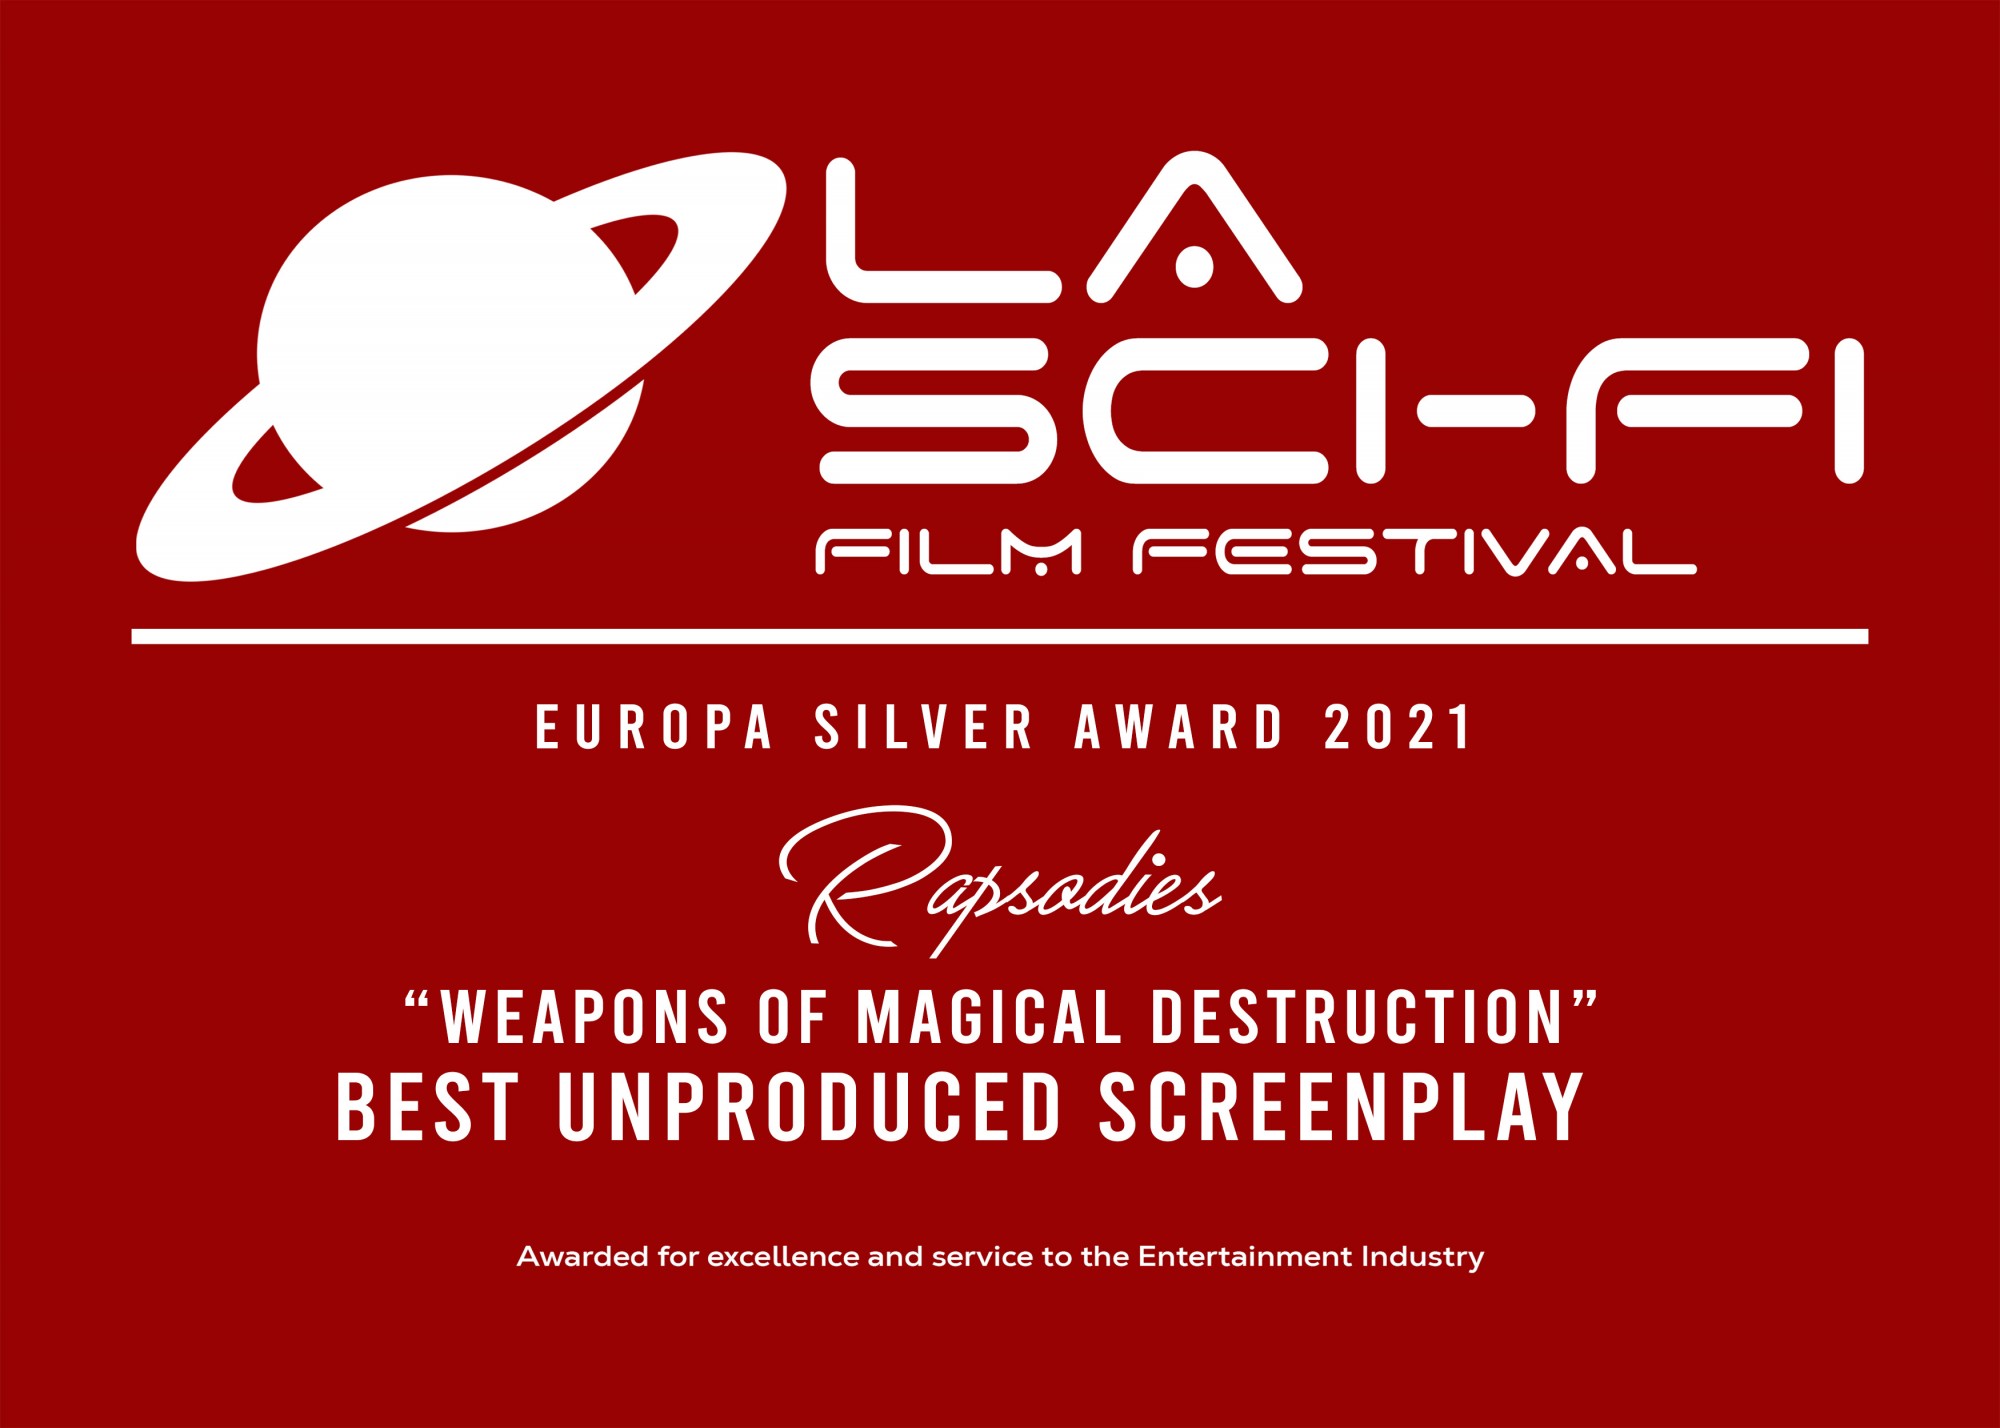 Weapons of Magical Destruction - Best Unproduced Screenplay - Europa Silver Award